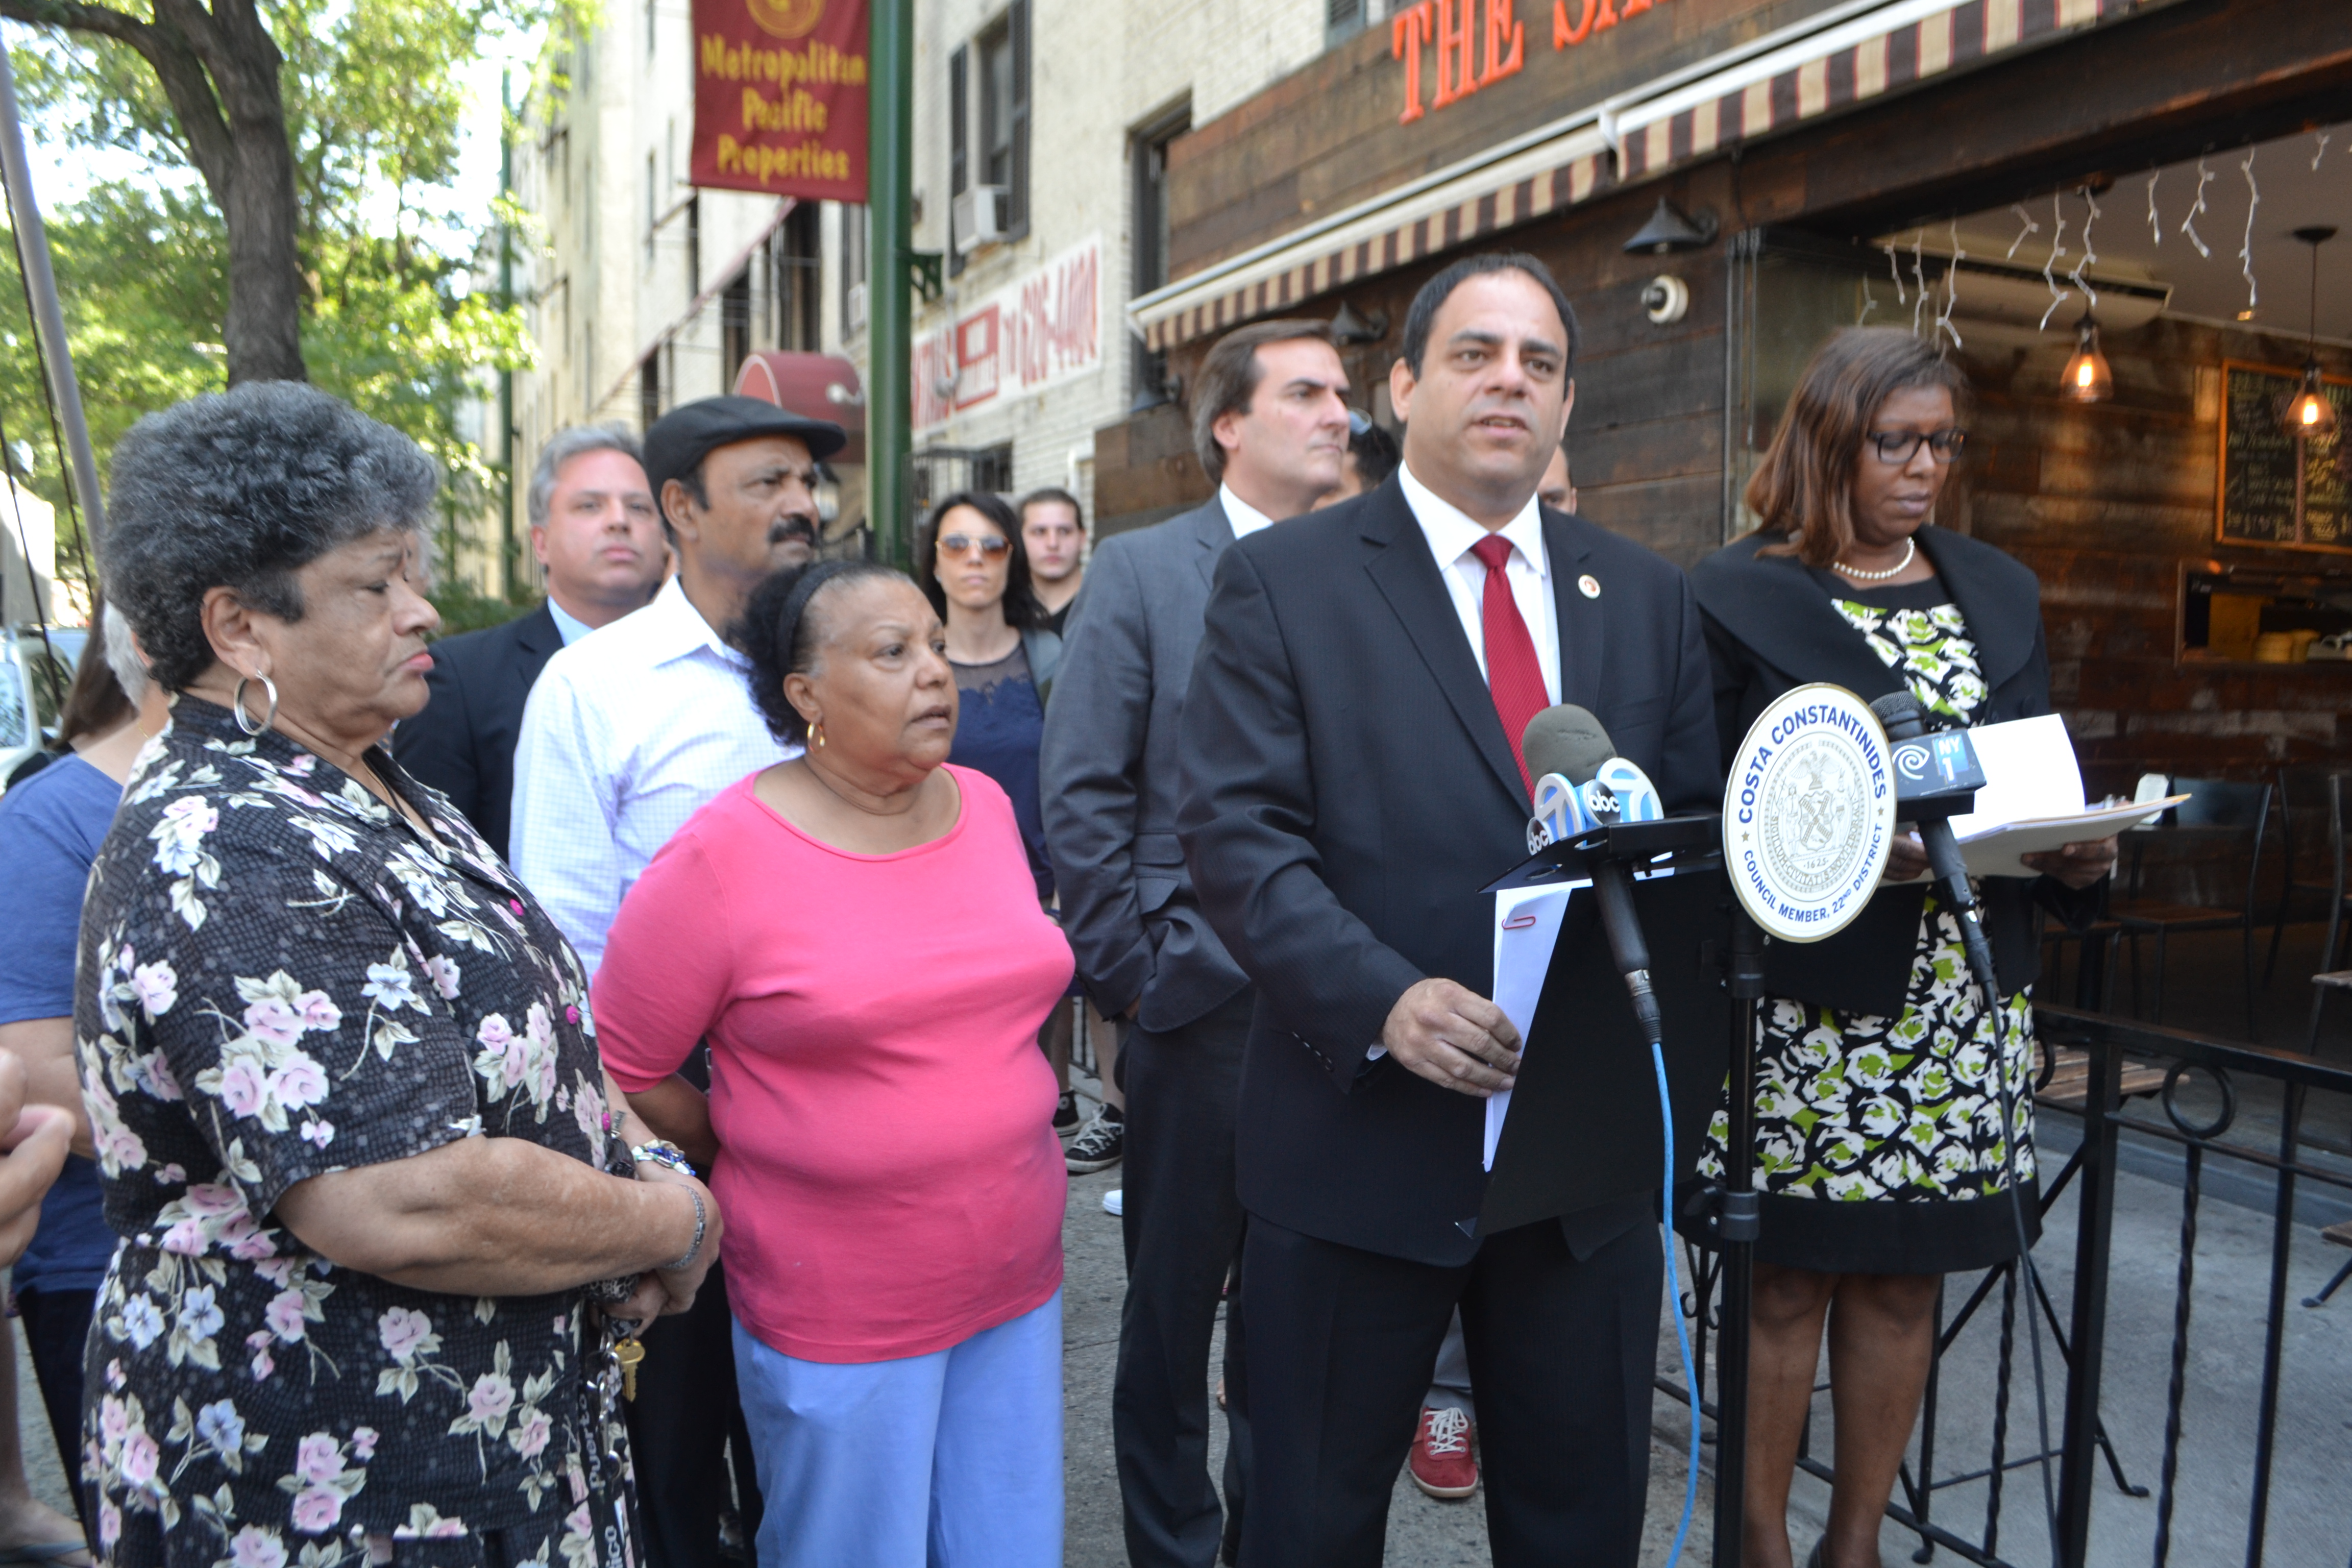 Elected officials joined residents and shareholders  of the Acropolis Gardens co-op building in Astoria to call on the management company to restore gas and hot water, which have been out since late April.